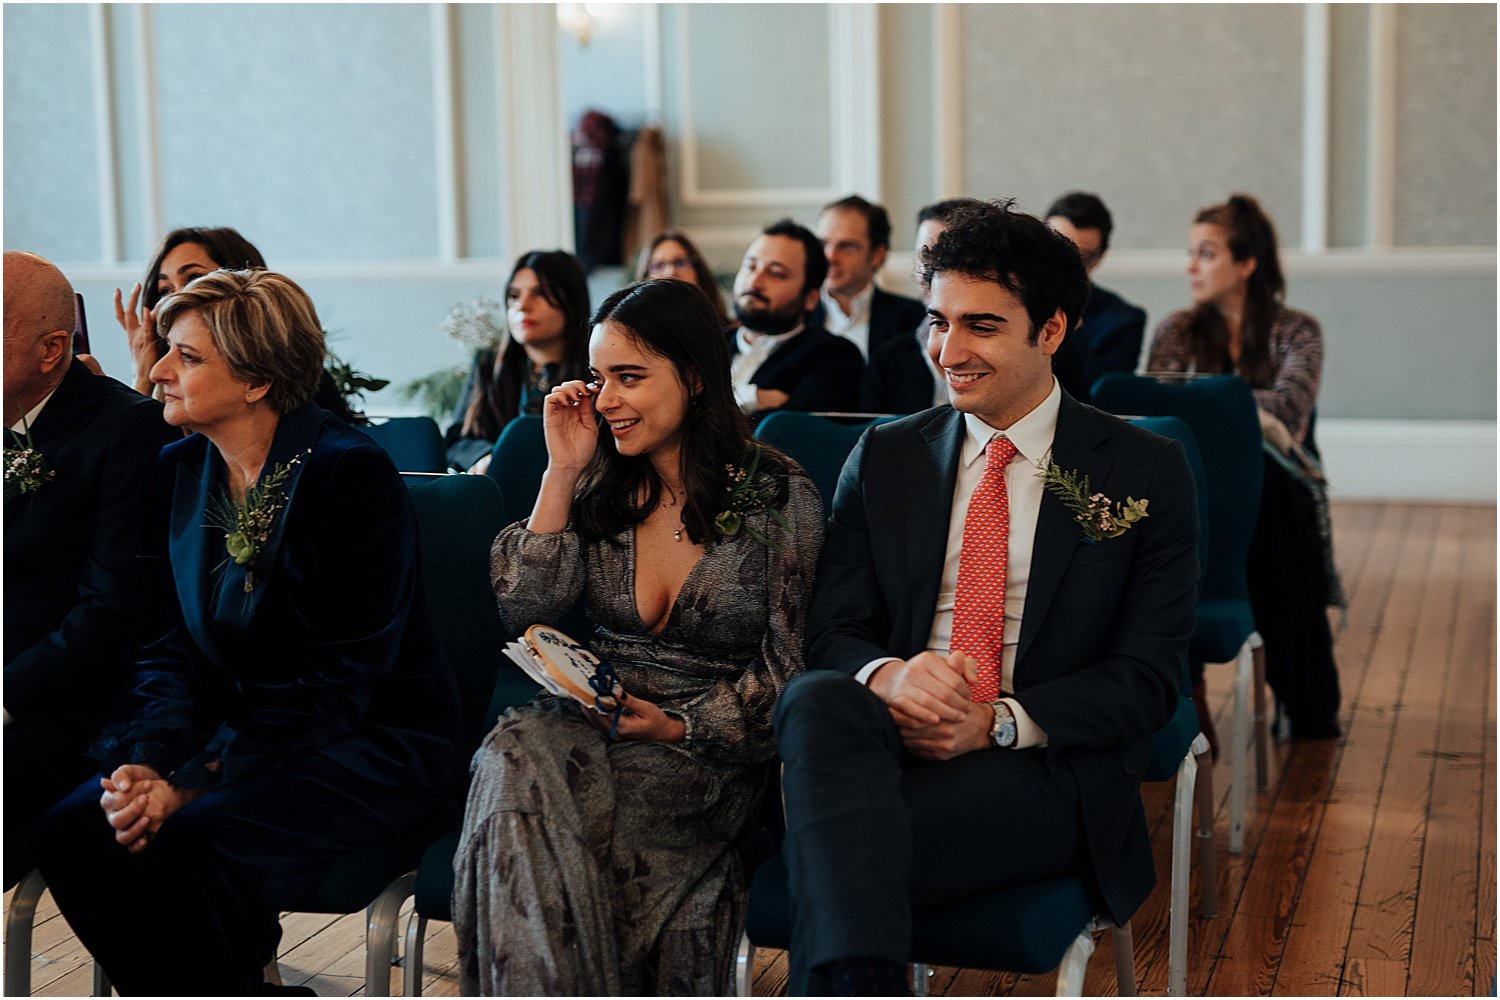 Candid wedding photo of guests during ceremony